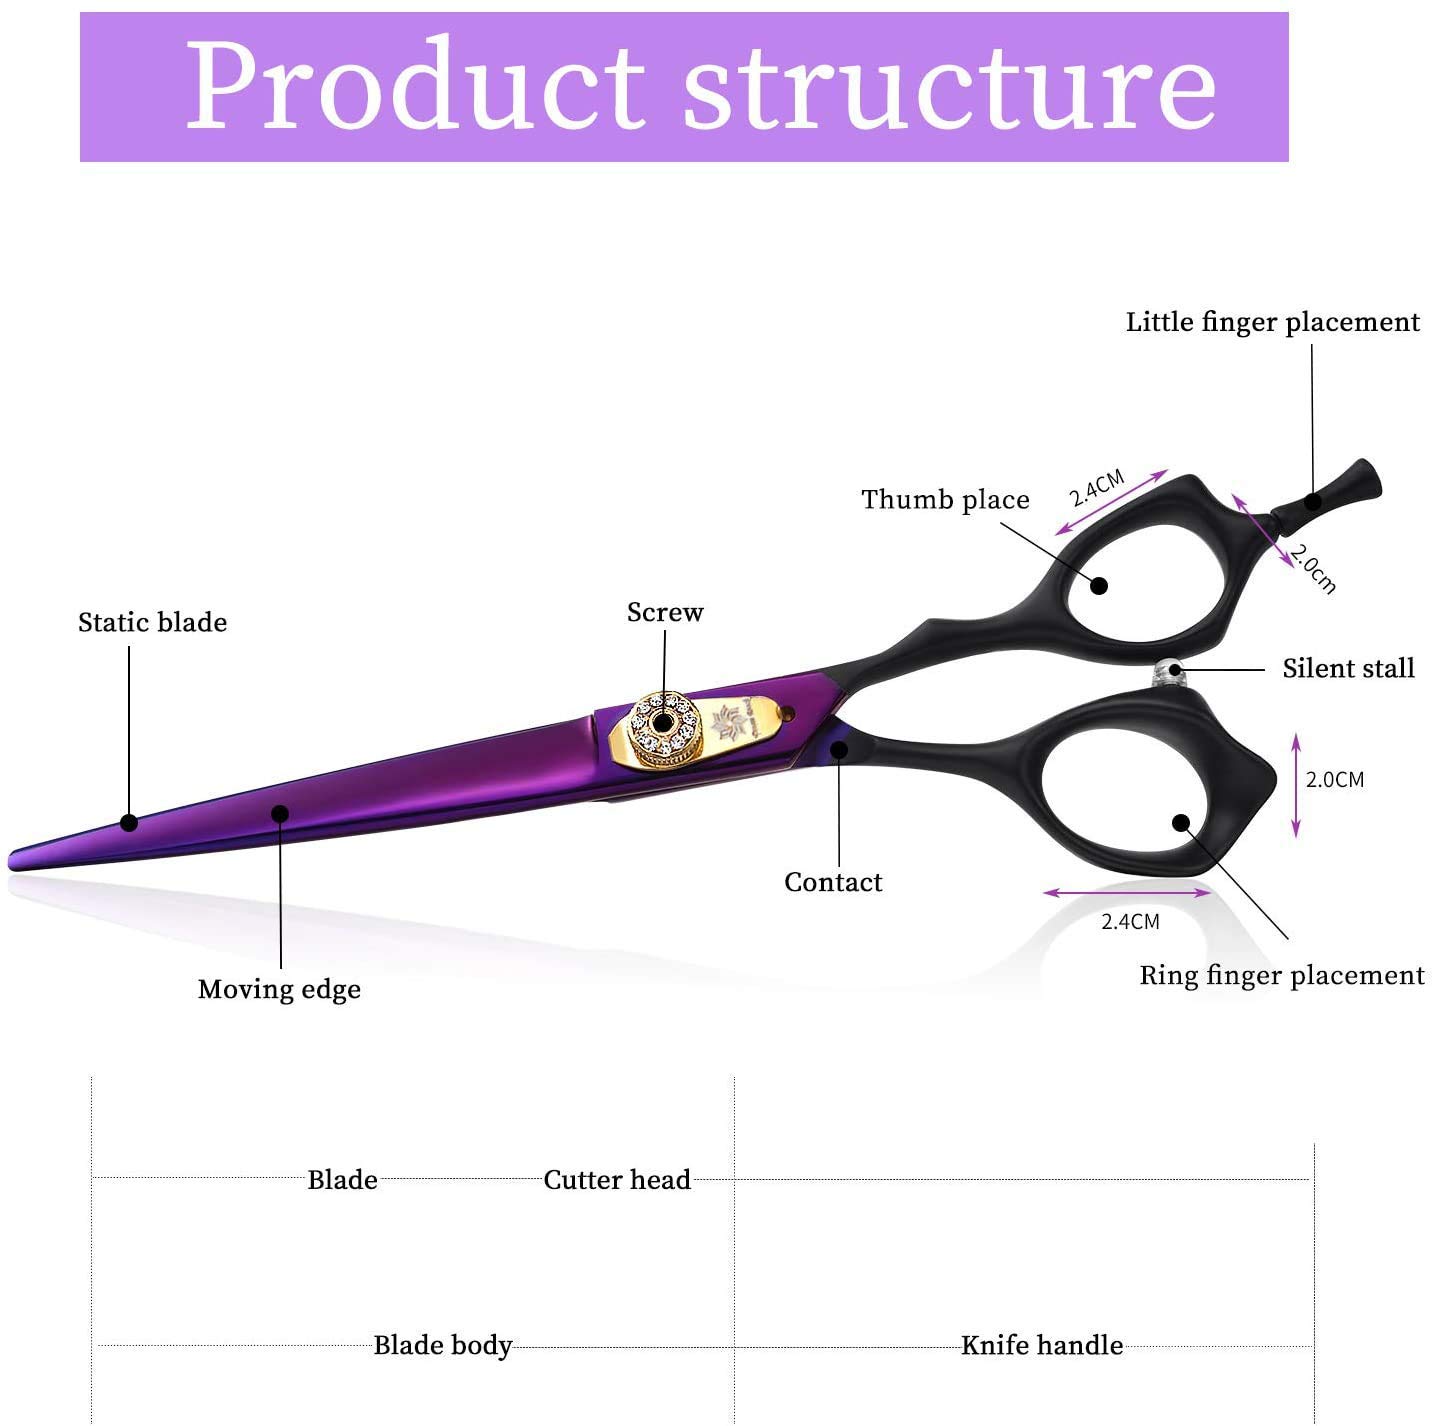 Dream Reach 7.0 inches Professional Decompressed Elastic Handle Pet Grooming Scissors Set,Straight & Chunker & 2 Curved Scissors 4pcs Set for Dog Grooming (Purple) (Cutting Scissor) - image 3 of 3